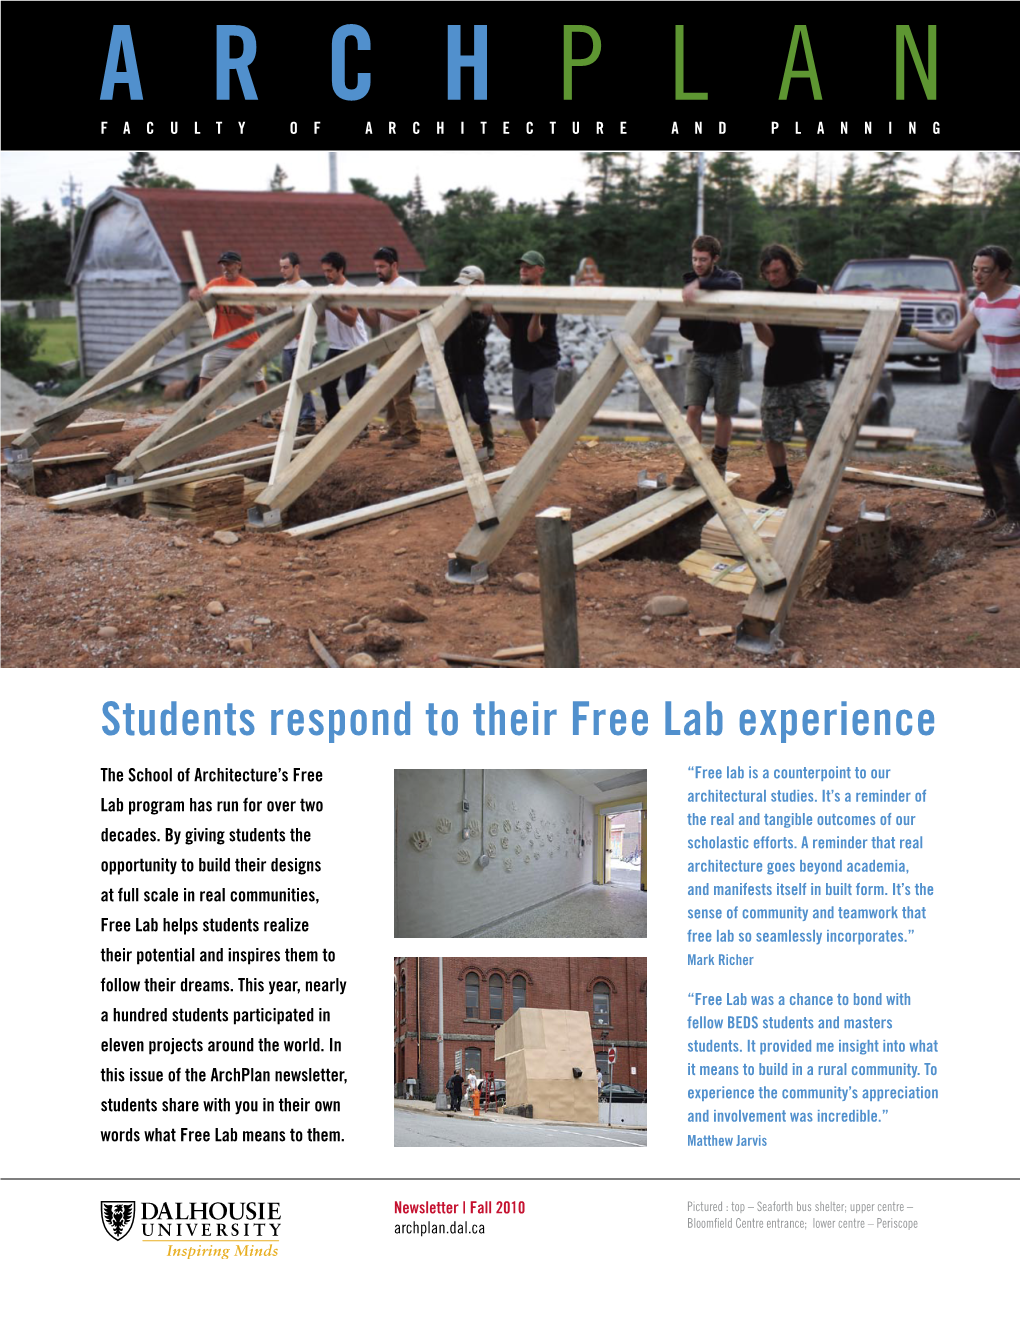 Students Respond to Their Free Lab Experience